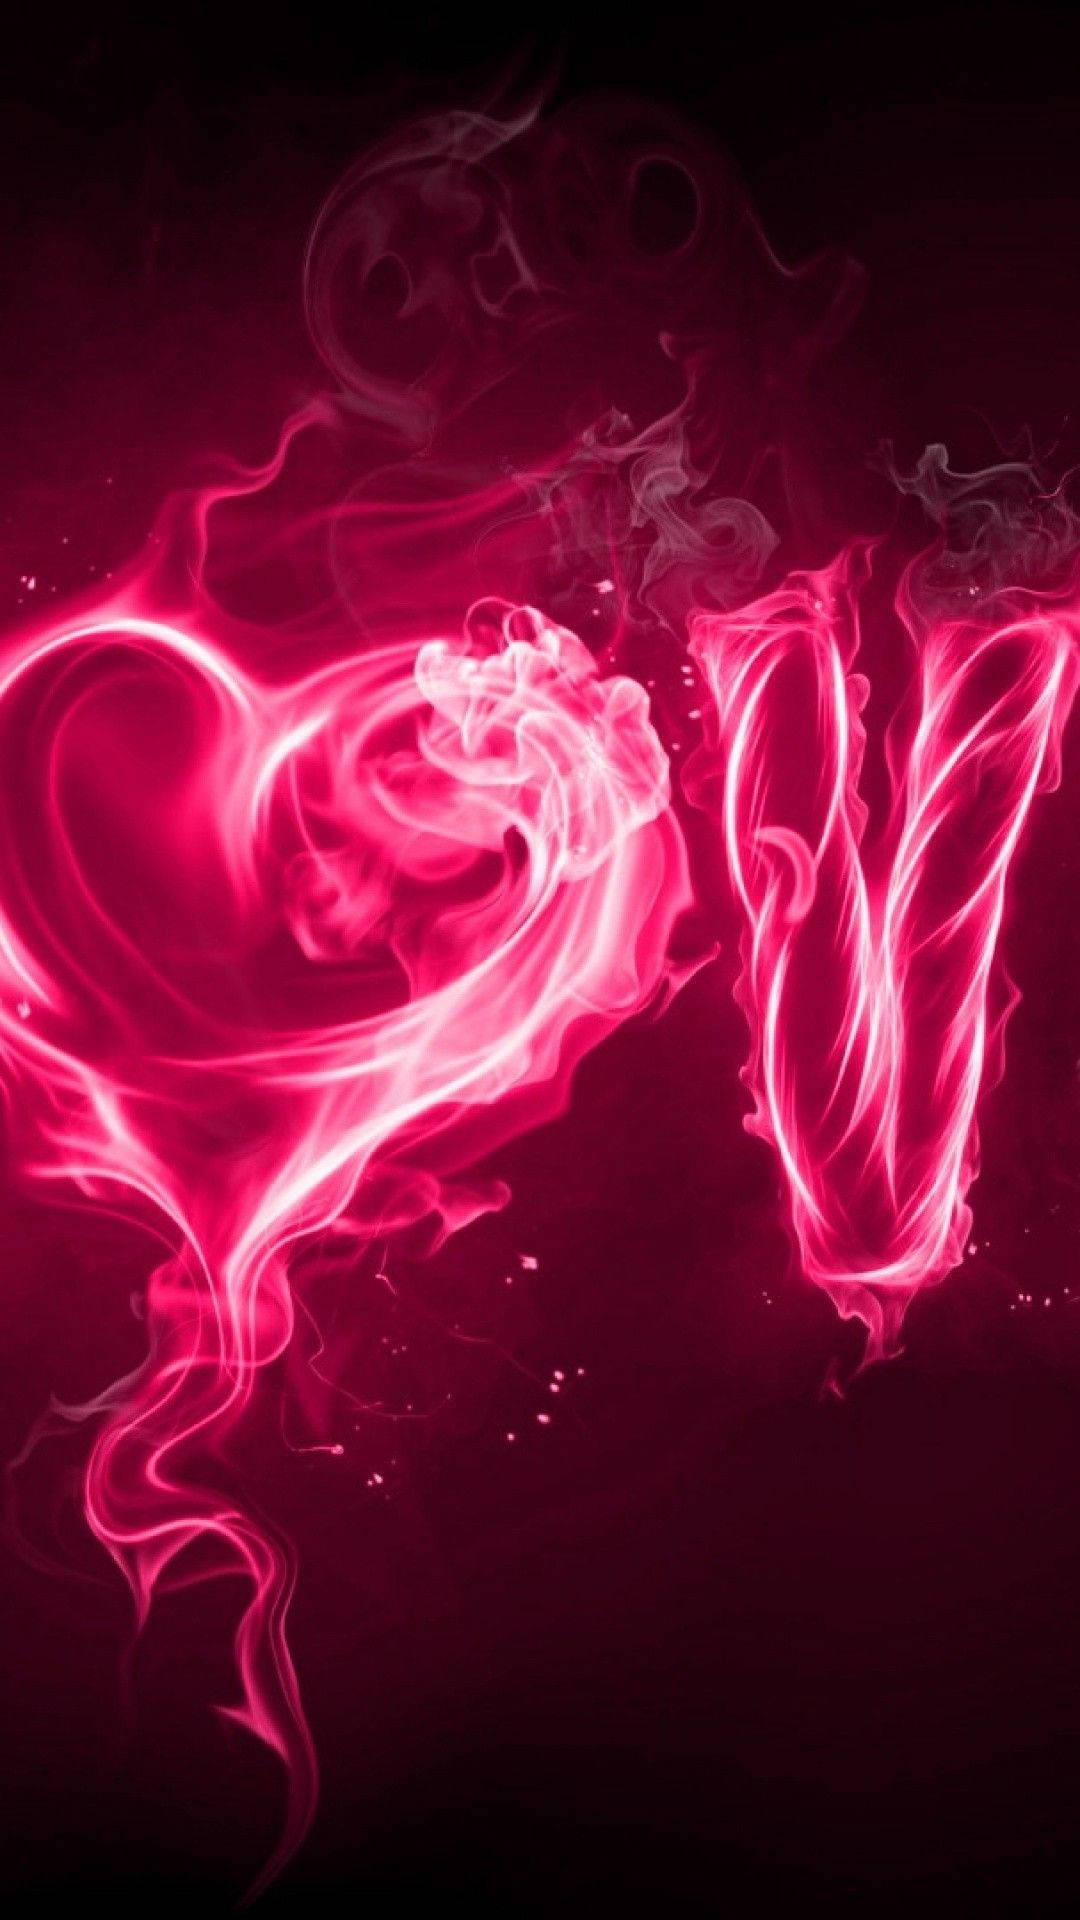 Download Pink Love Animated Wallpaper 